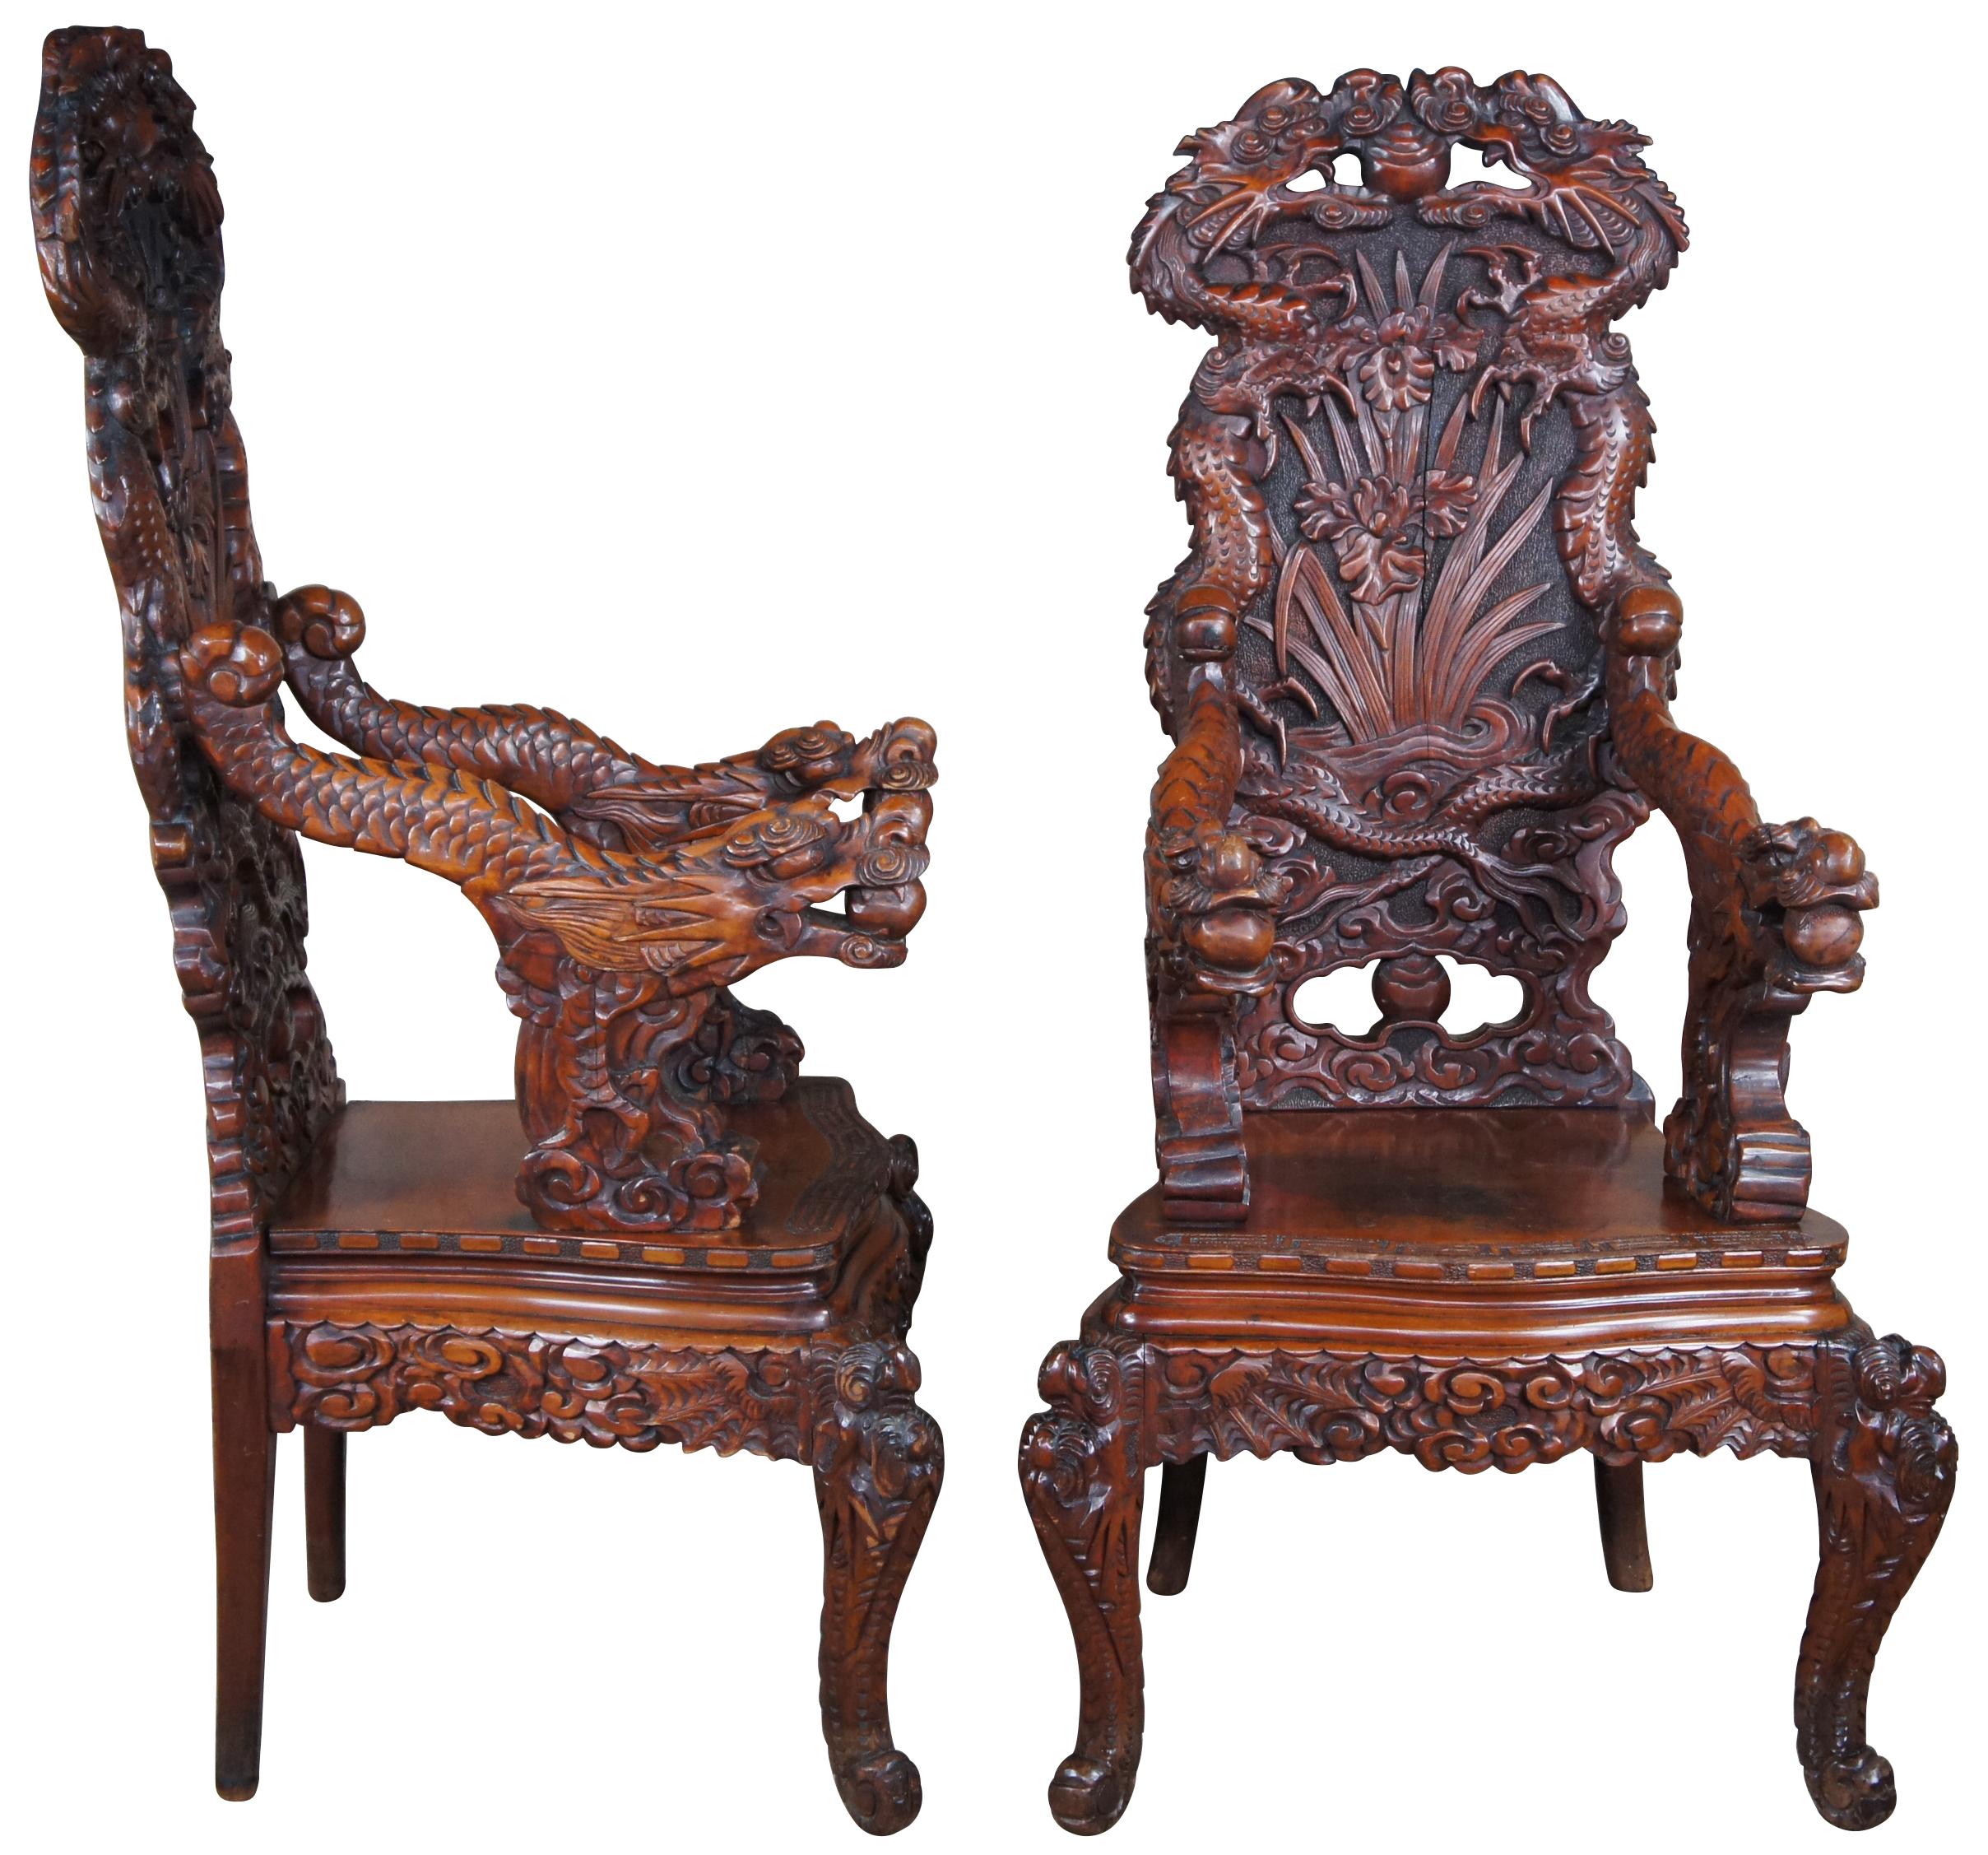 A breathtaking pair of 19th century imperial meiji throne chairs. Made from Elm with an elaborate and meticulous carved dragon motif. At the center are a pair of orchids flanked by sprawling dragons which can be seen sharing a ball or pearl along